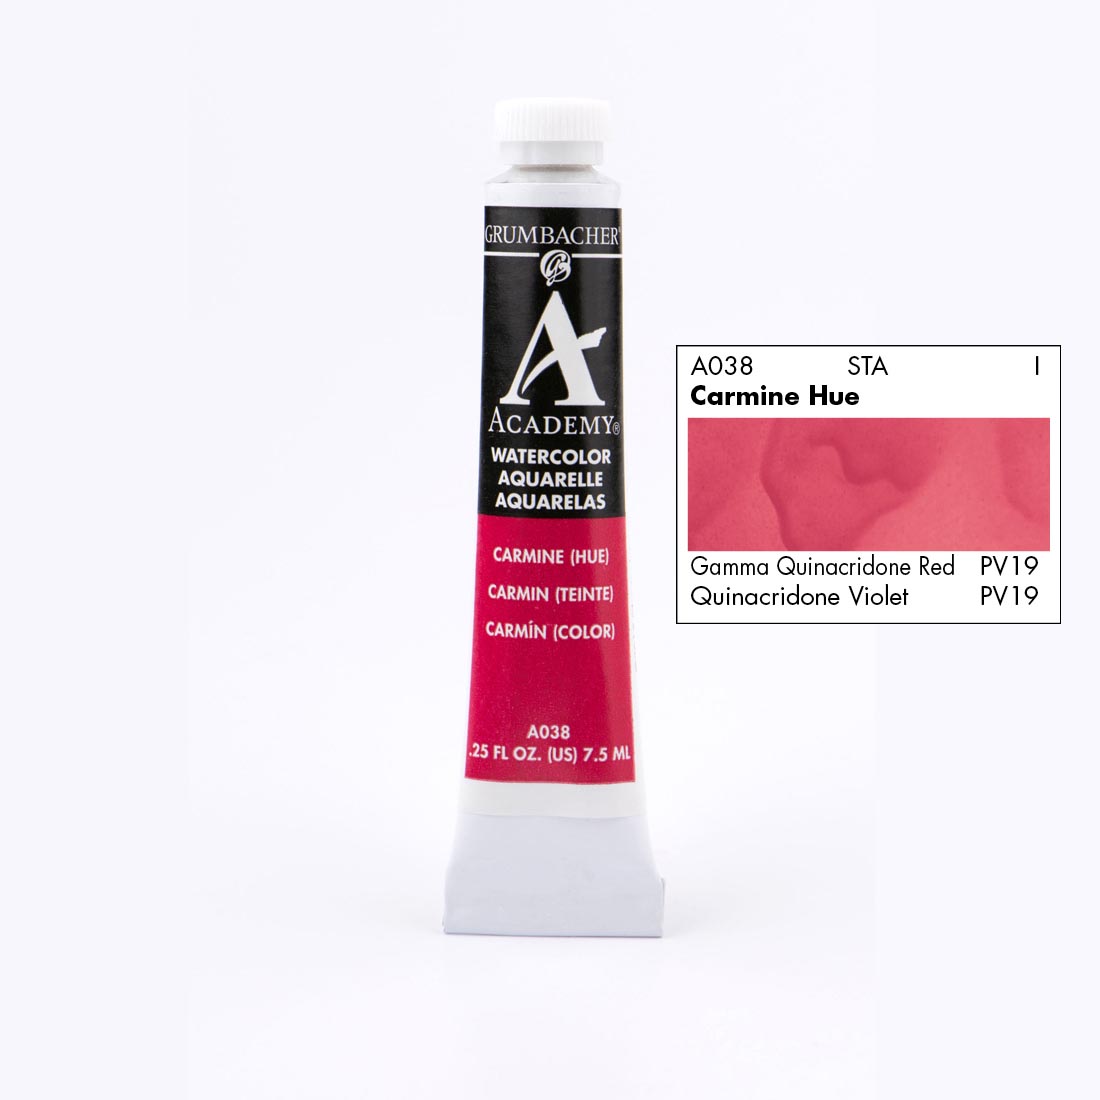 Tube of Grumbacher Academy Watercolor beside Carmine Hue color swatch